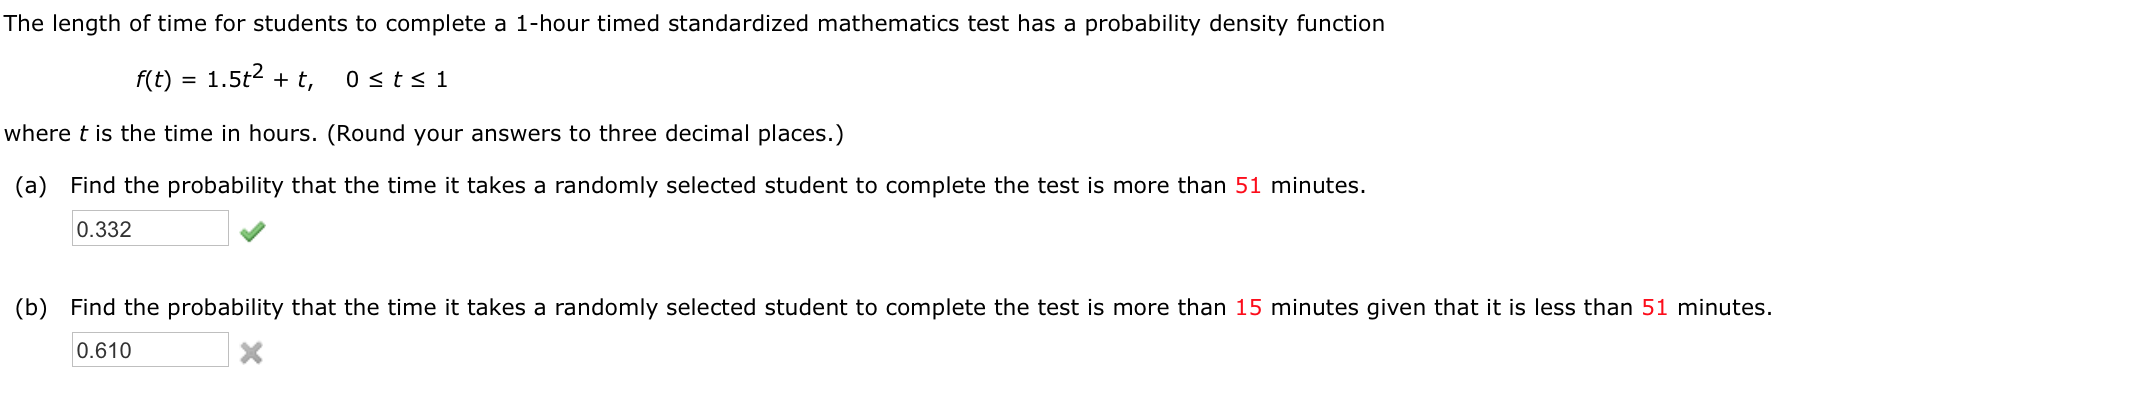 The length of time for students to complete a 1-hour timed standardized mathematics test has a probability density function
f(t) = 1.5t2 + t,
0 <ts 1
where t is the time in hours. (Round your answers to three decimal places.)
(a) Find the probability that the time it takes a randomly selected student to complete the test is more than 51 minutes.
0.332
(b) Find the probability that the time it takes a randomly selected student to complete the test is more than 15 minutes given that it is less than 51 minutes.
0.610
